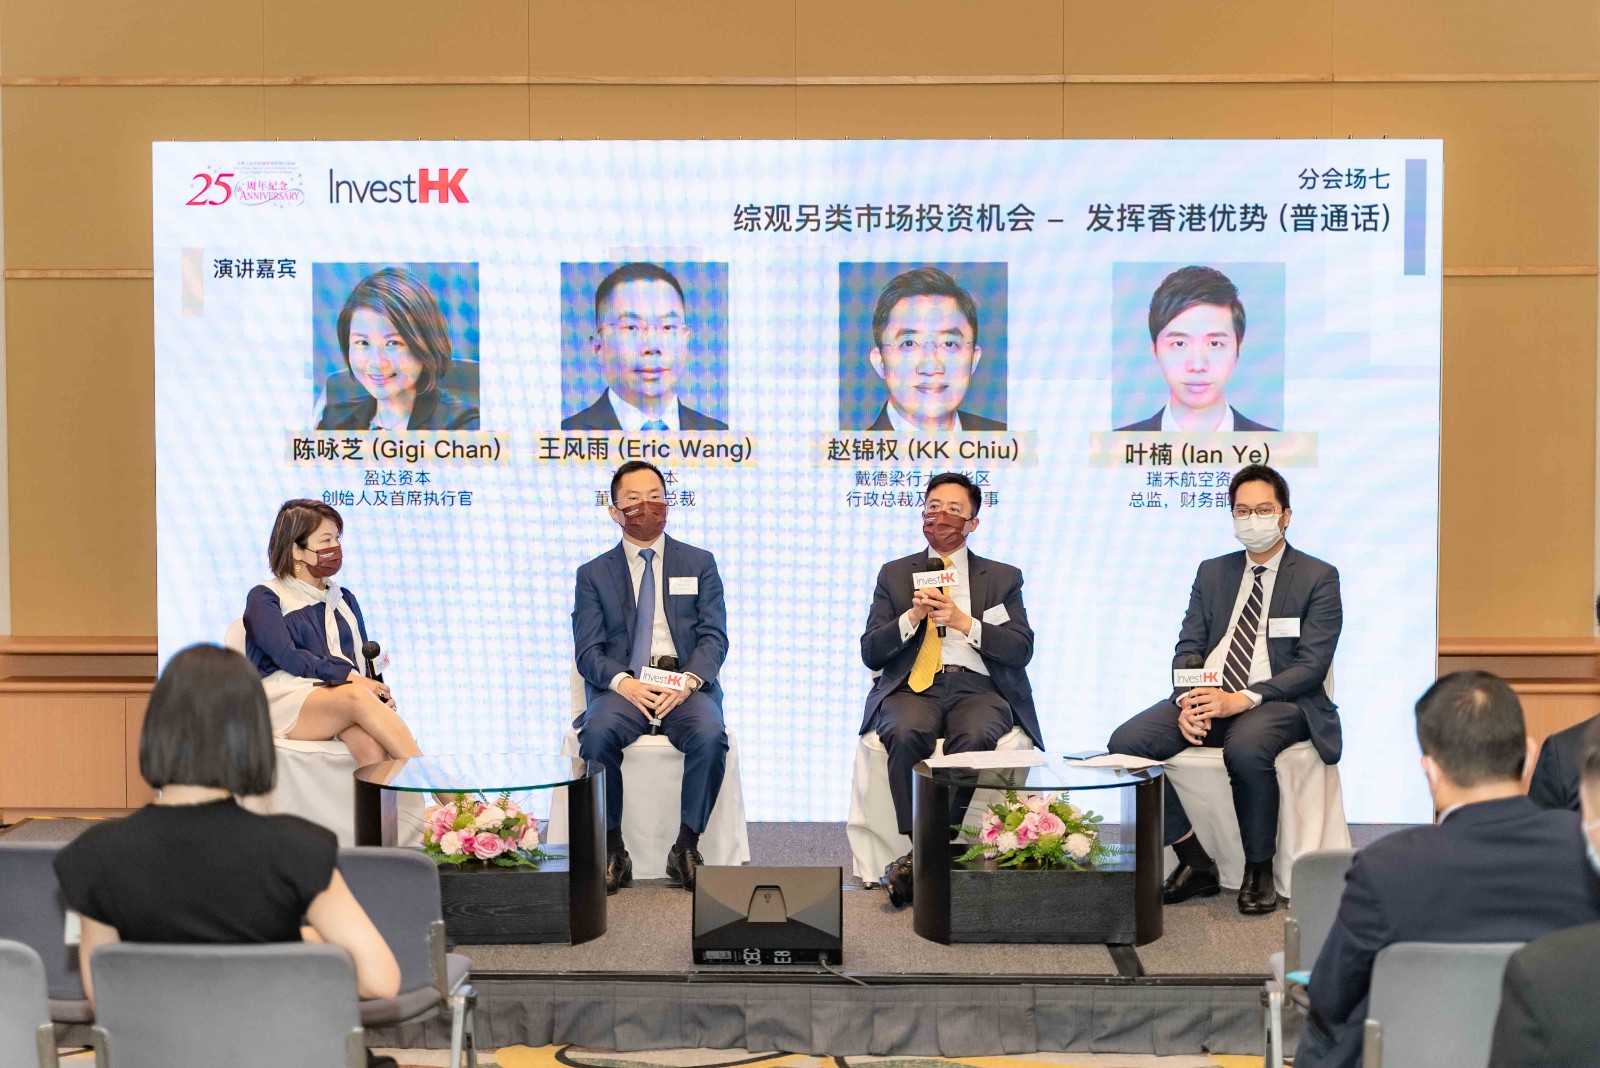 Clover Aviation Capital Joins InvestHK 25th Anniversary Promotion Week_Official Website.jpg